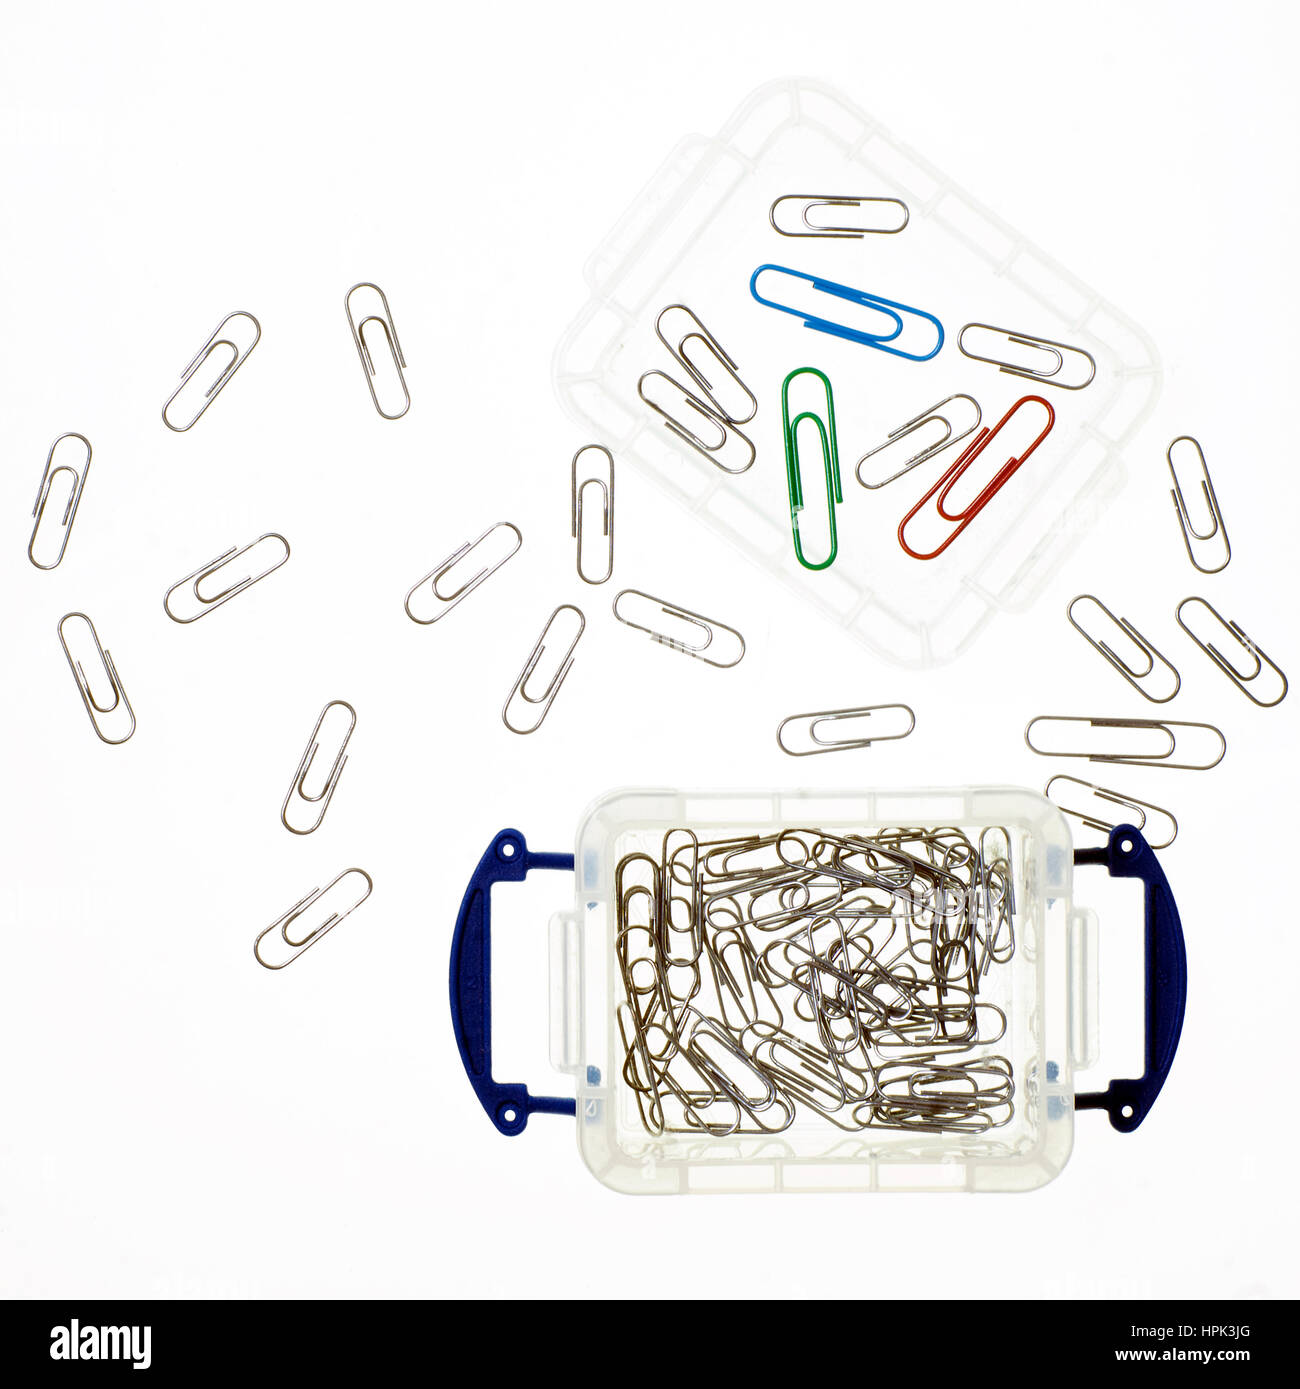 Plastic box containing paper clips Stock Photo